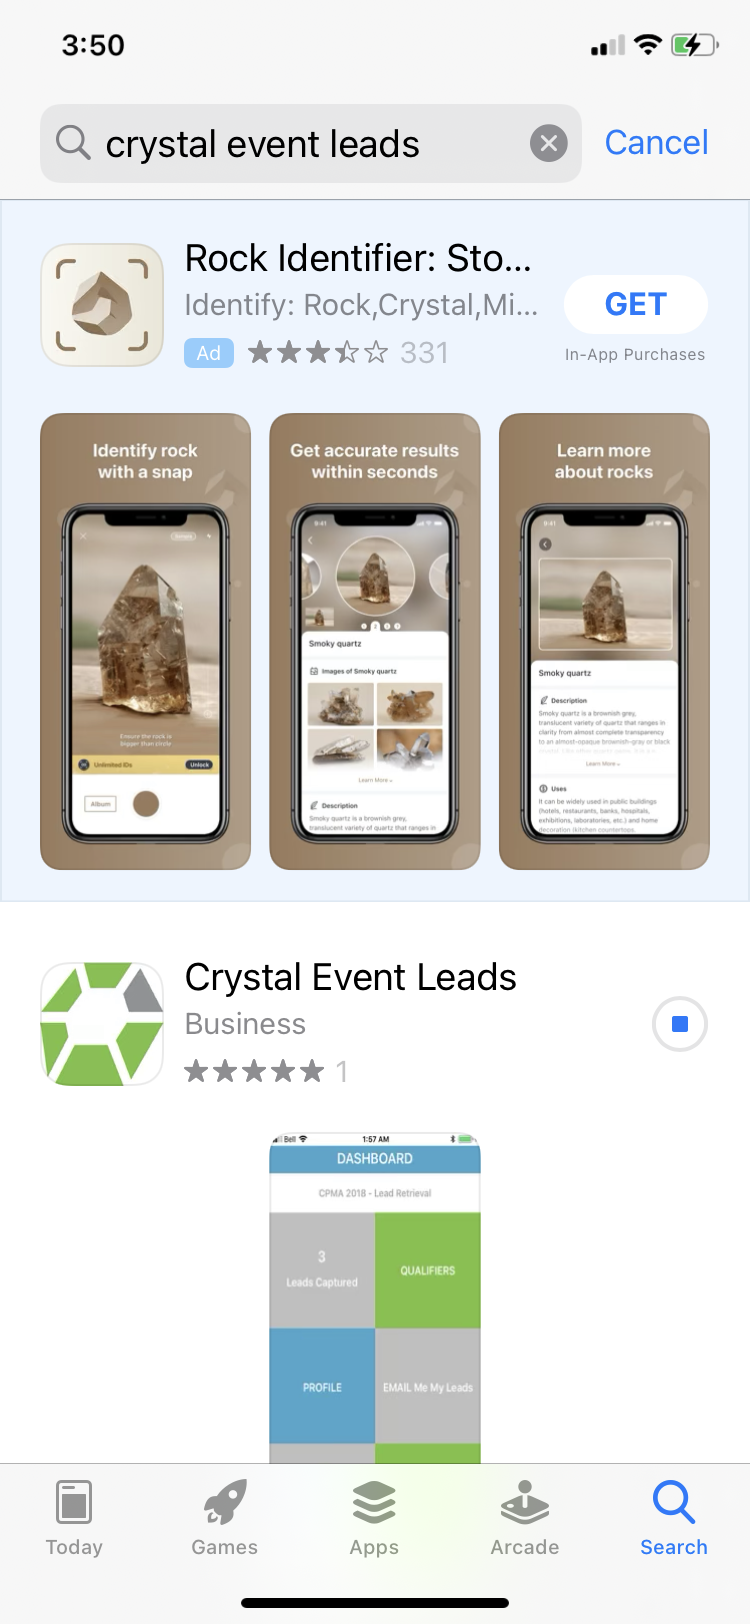 Crystal Event Leads